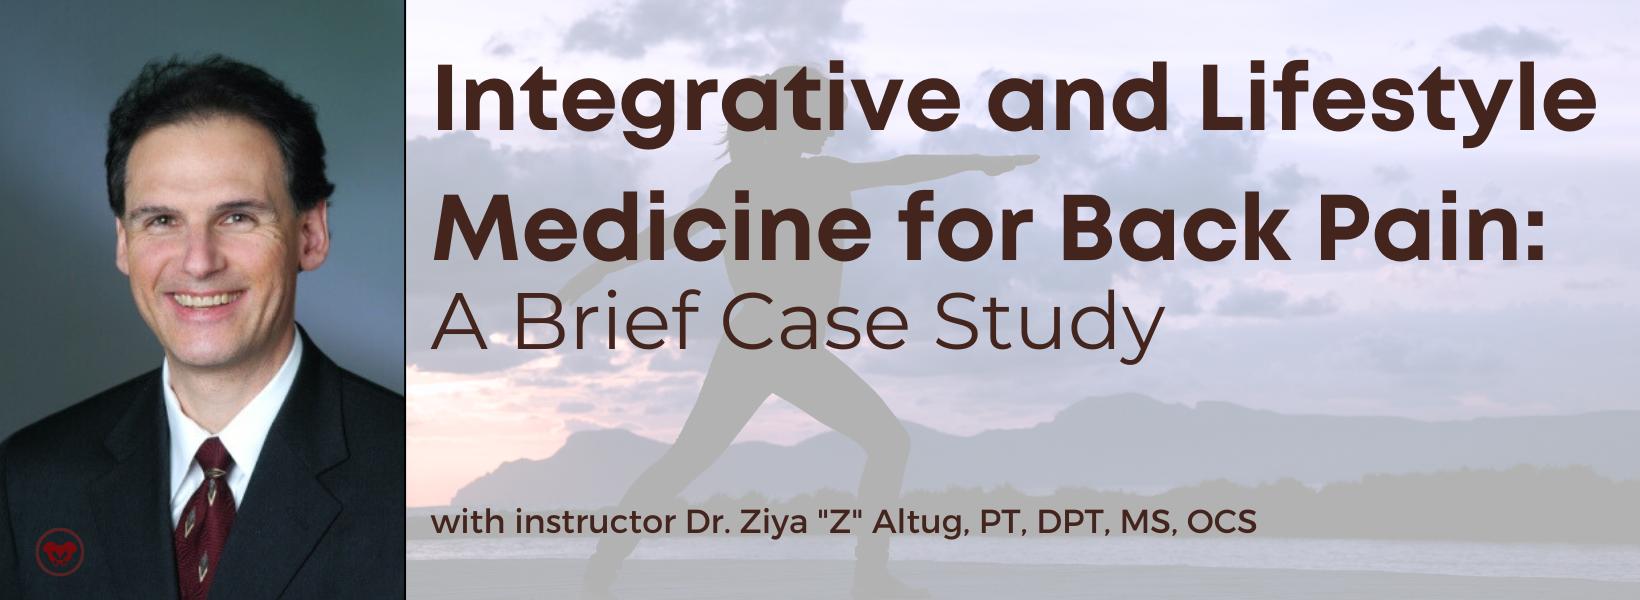 Integrative and Lifestyle Medicine for Back Pain: 
A Brief Case Study